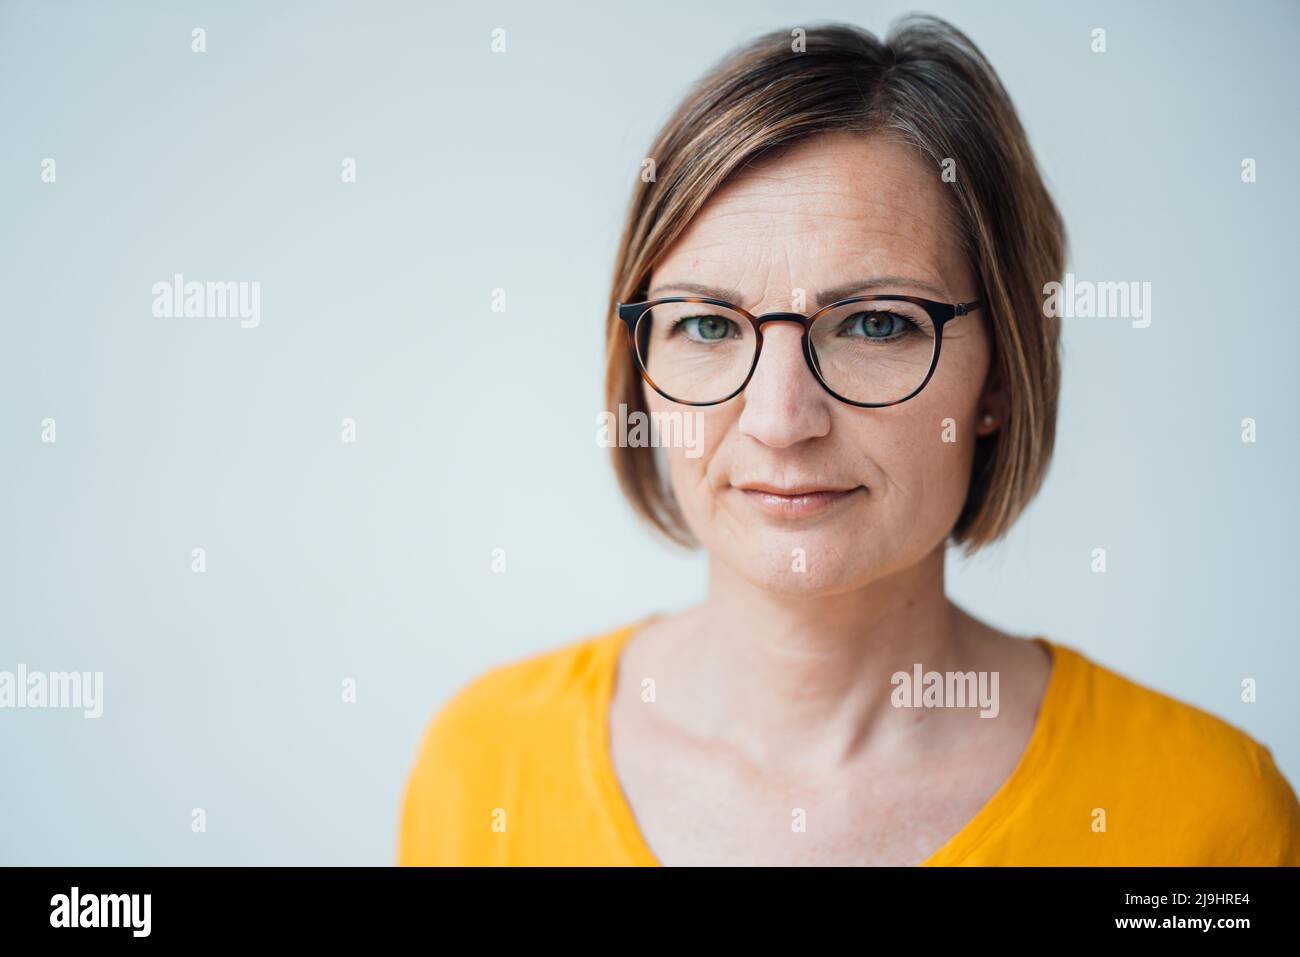 Businesswoman with short brown hair against white background Stock Photo